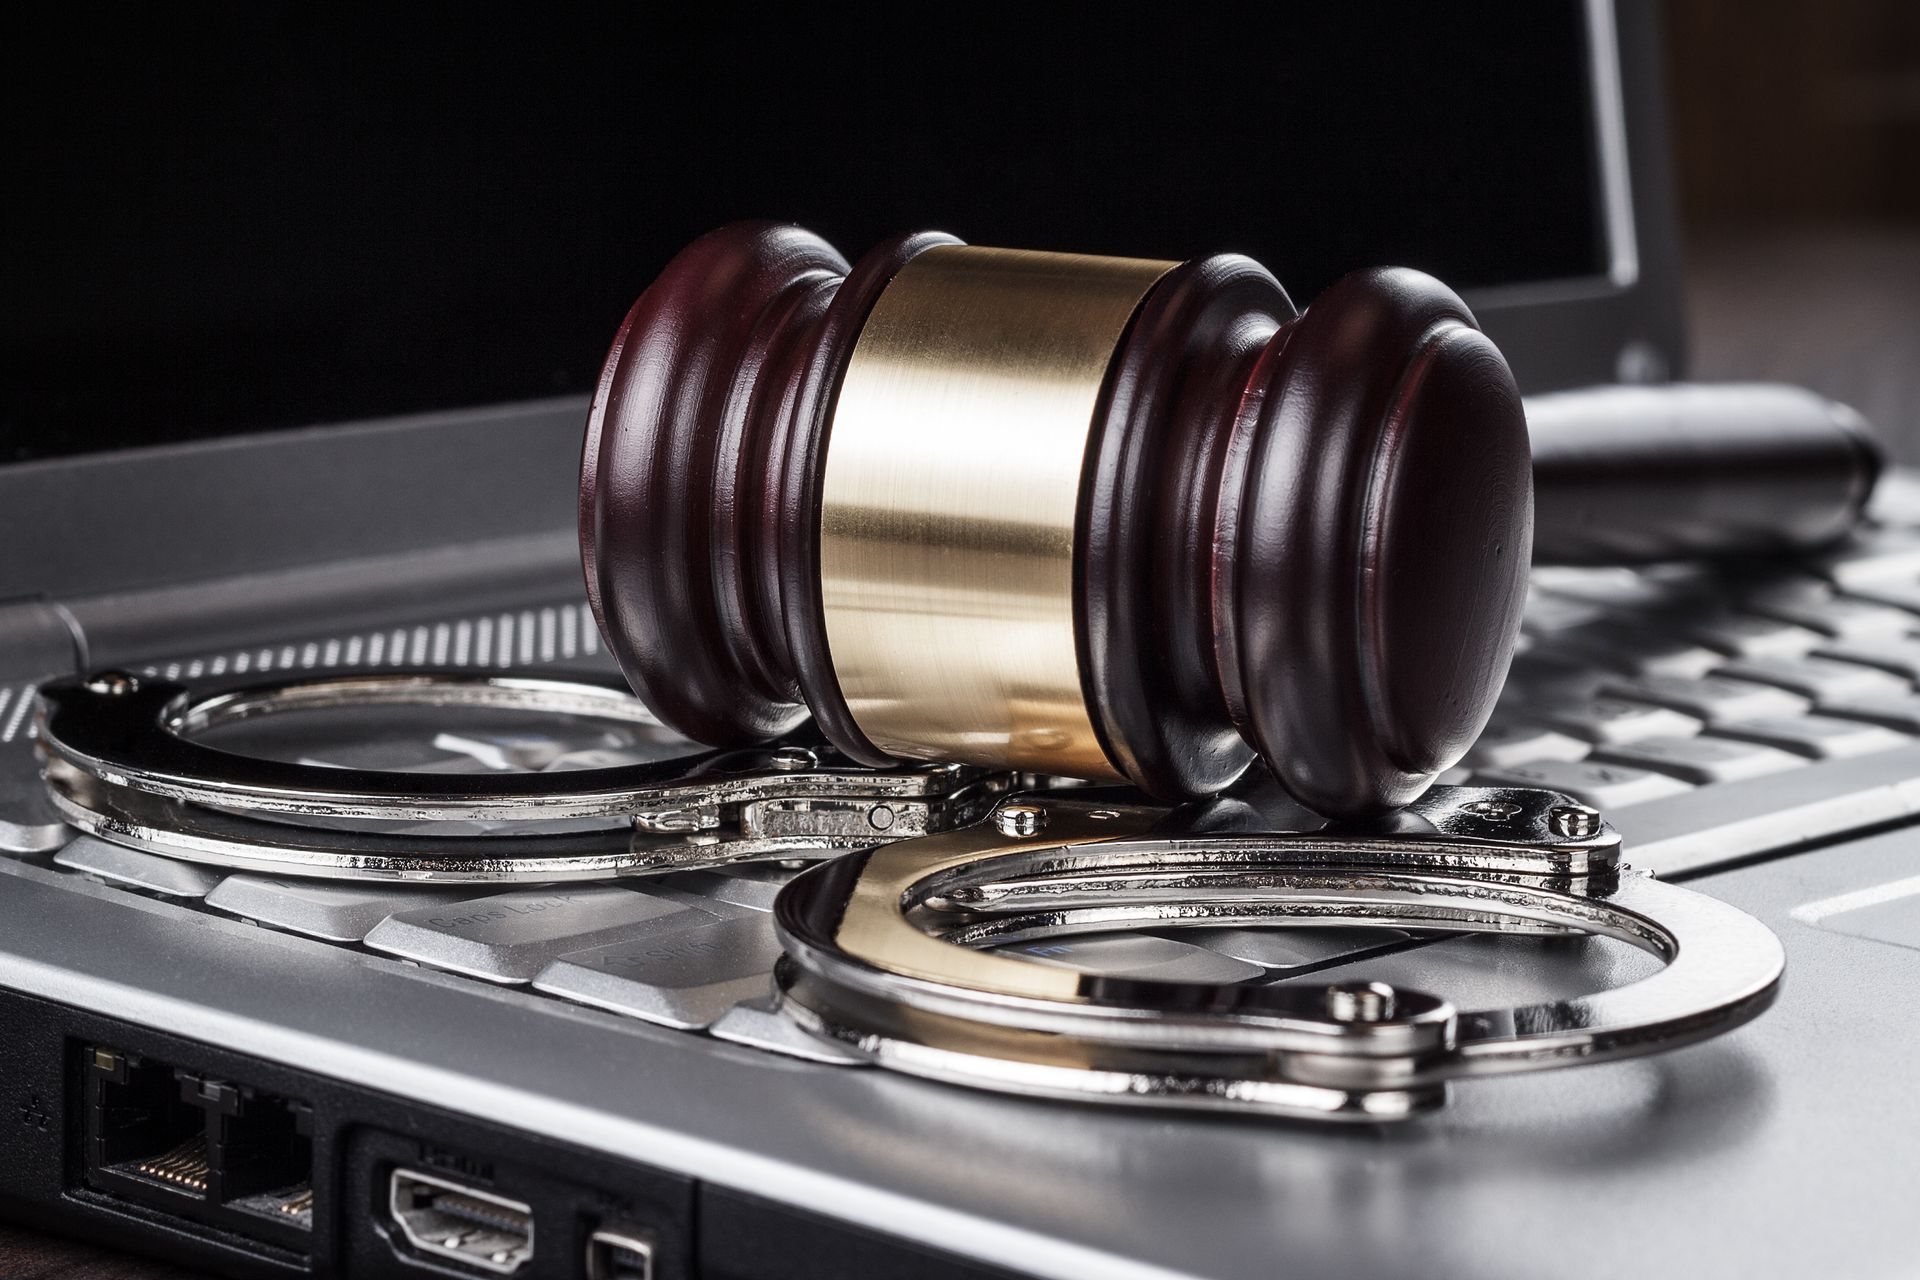 An Image of a laptop computer with a gavel and handcuffs lying on the keyboard